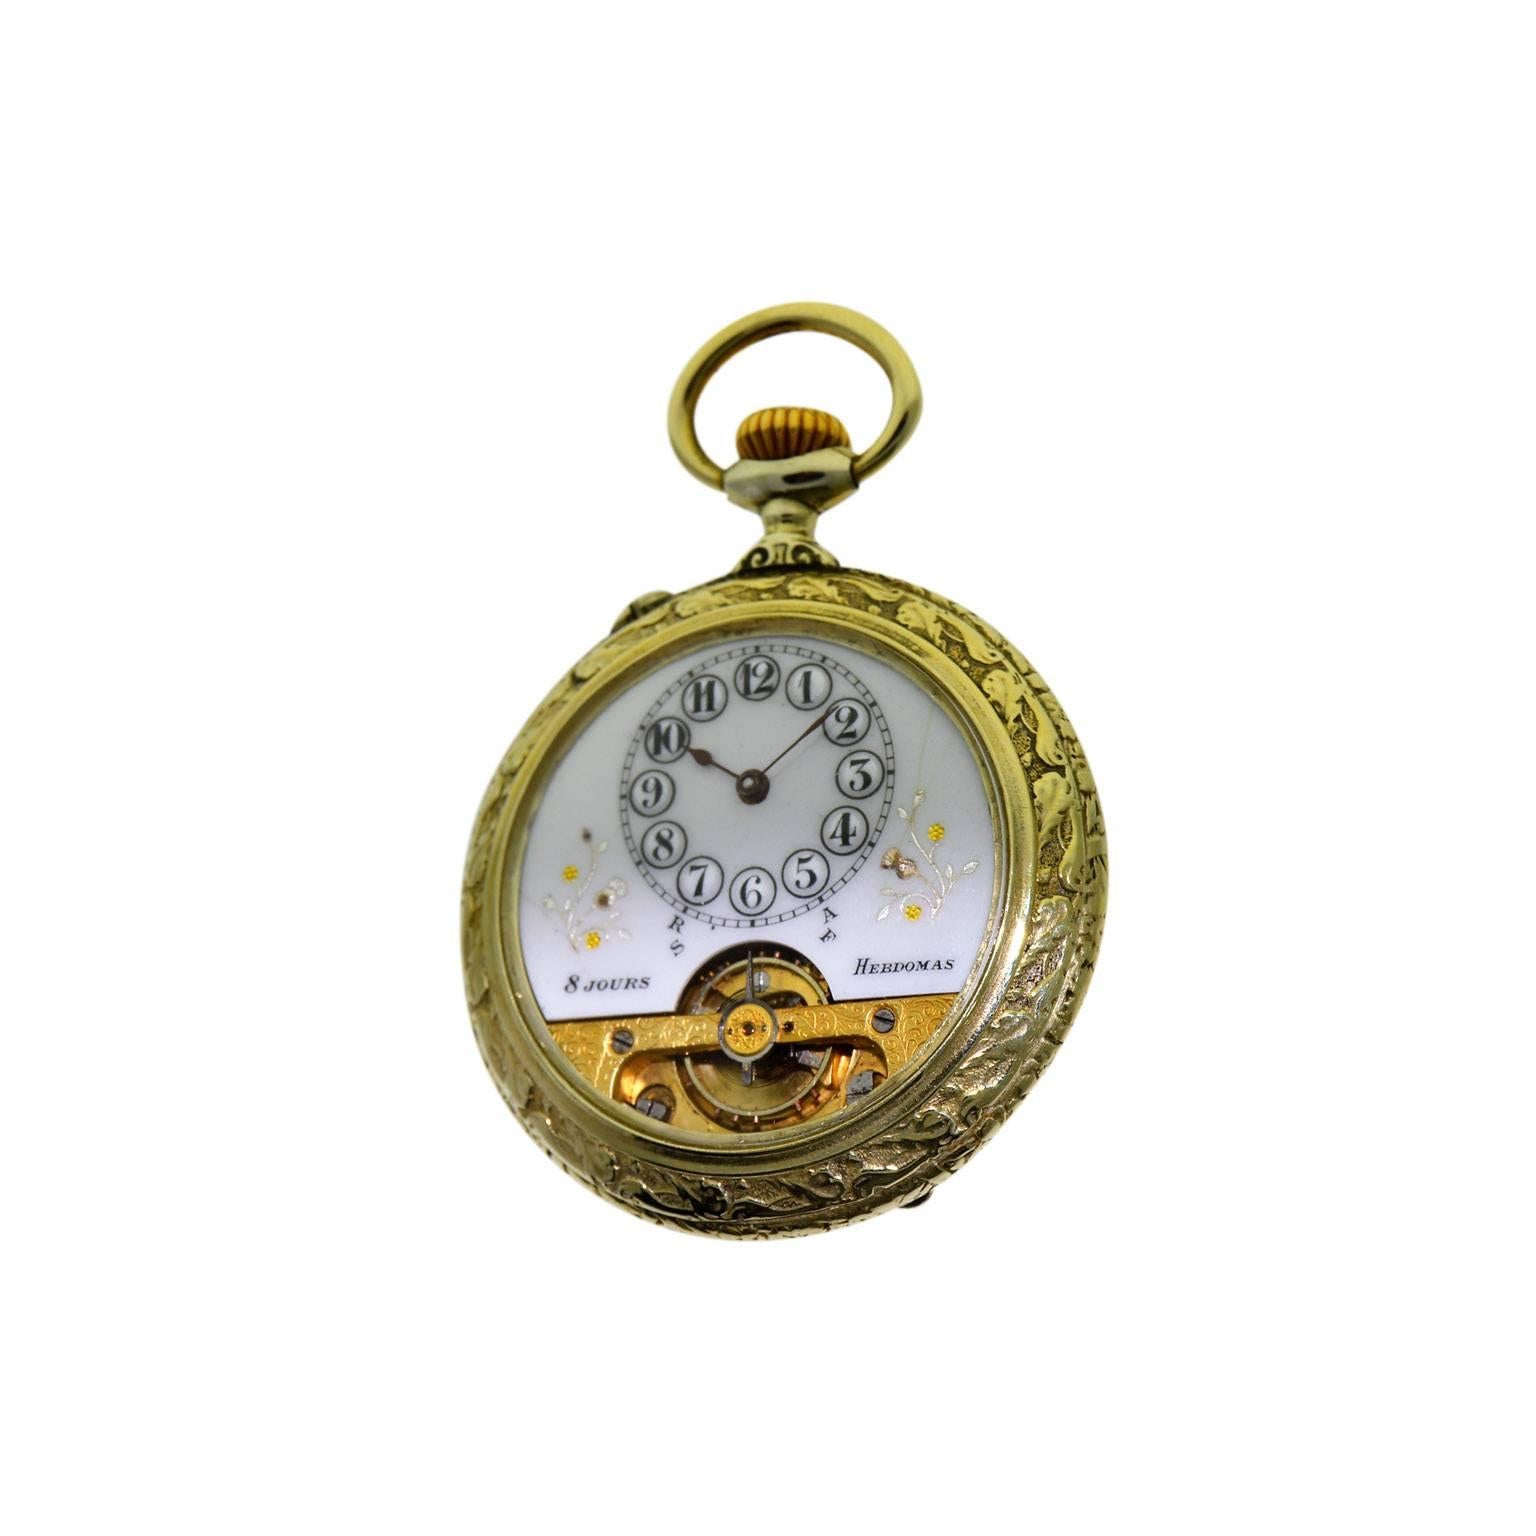 FACTORY / HOUSE: Hebdomas Watch Company
STYLE / REFERENCE: Open Faced Pocket Watch / Exposed Balance
METAL / MATERIAL: Nickel Silver
CIRCA: 1920s
DIMENSIONS: 51mm 
MOVEMENT / CALIBER: Manual Winding / 17 Jewels 
DIAL / HANDS: Enamel Original /